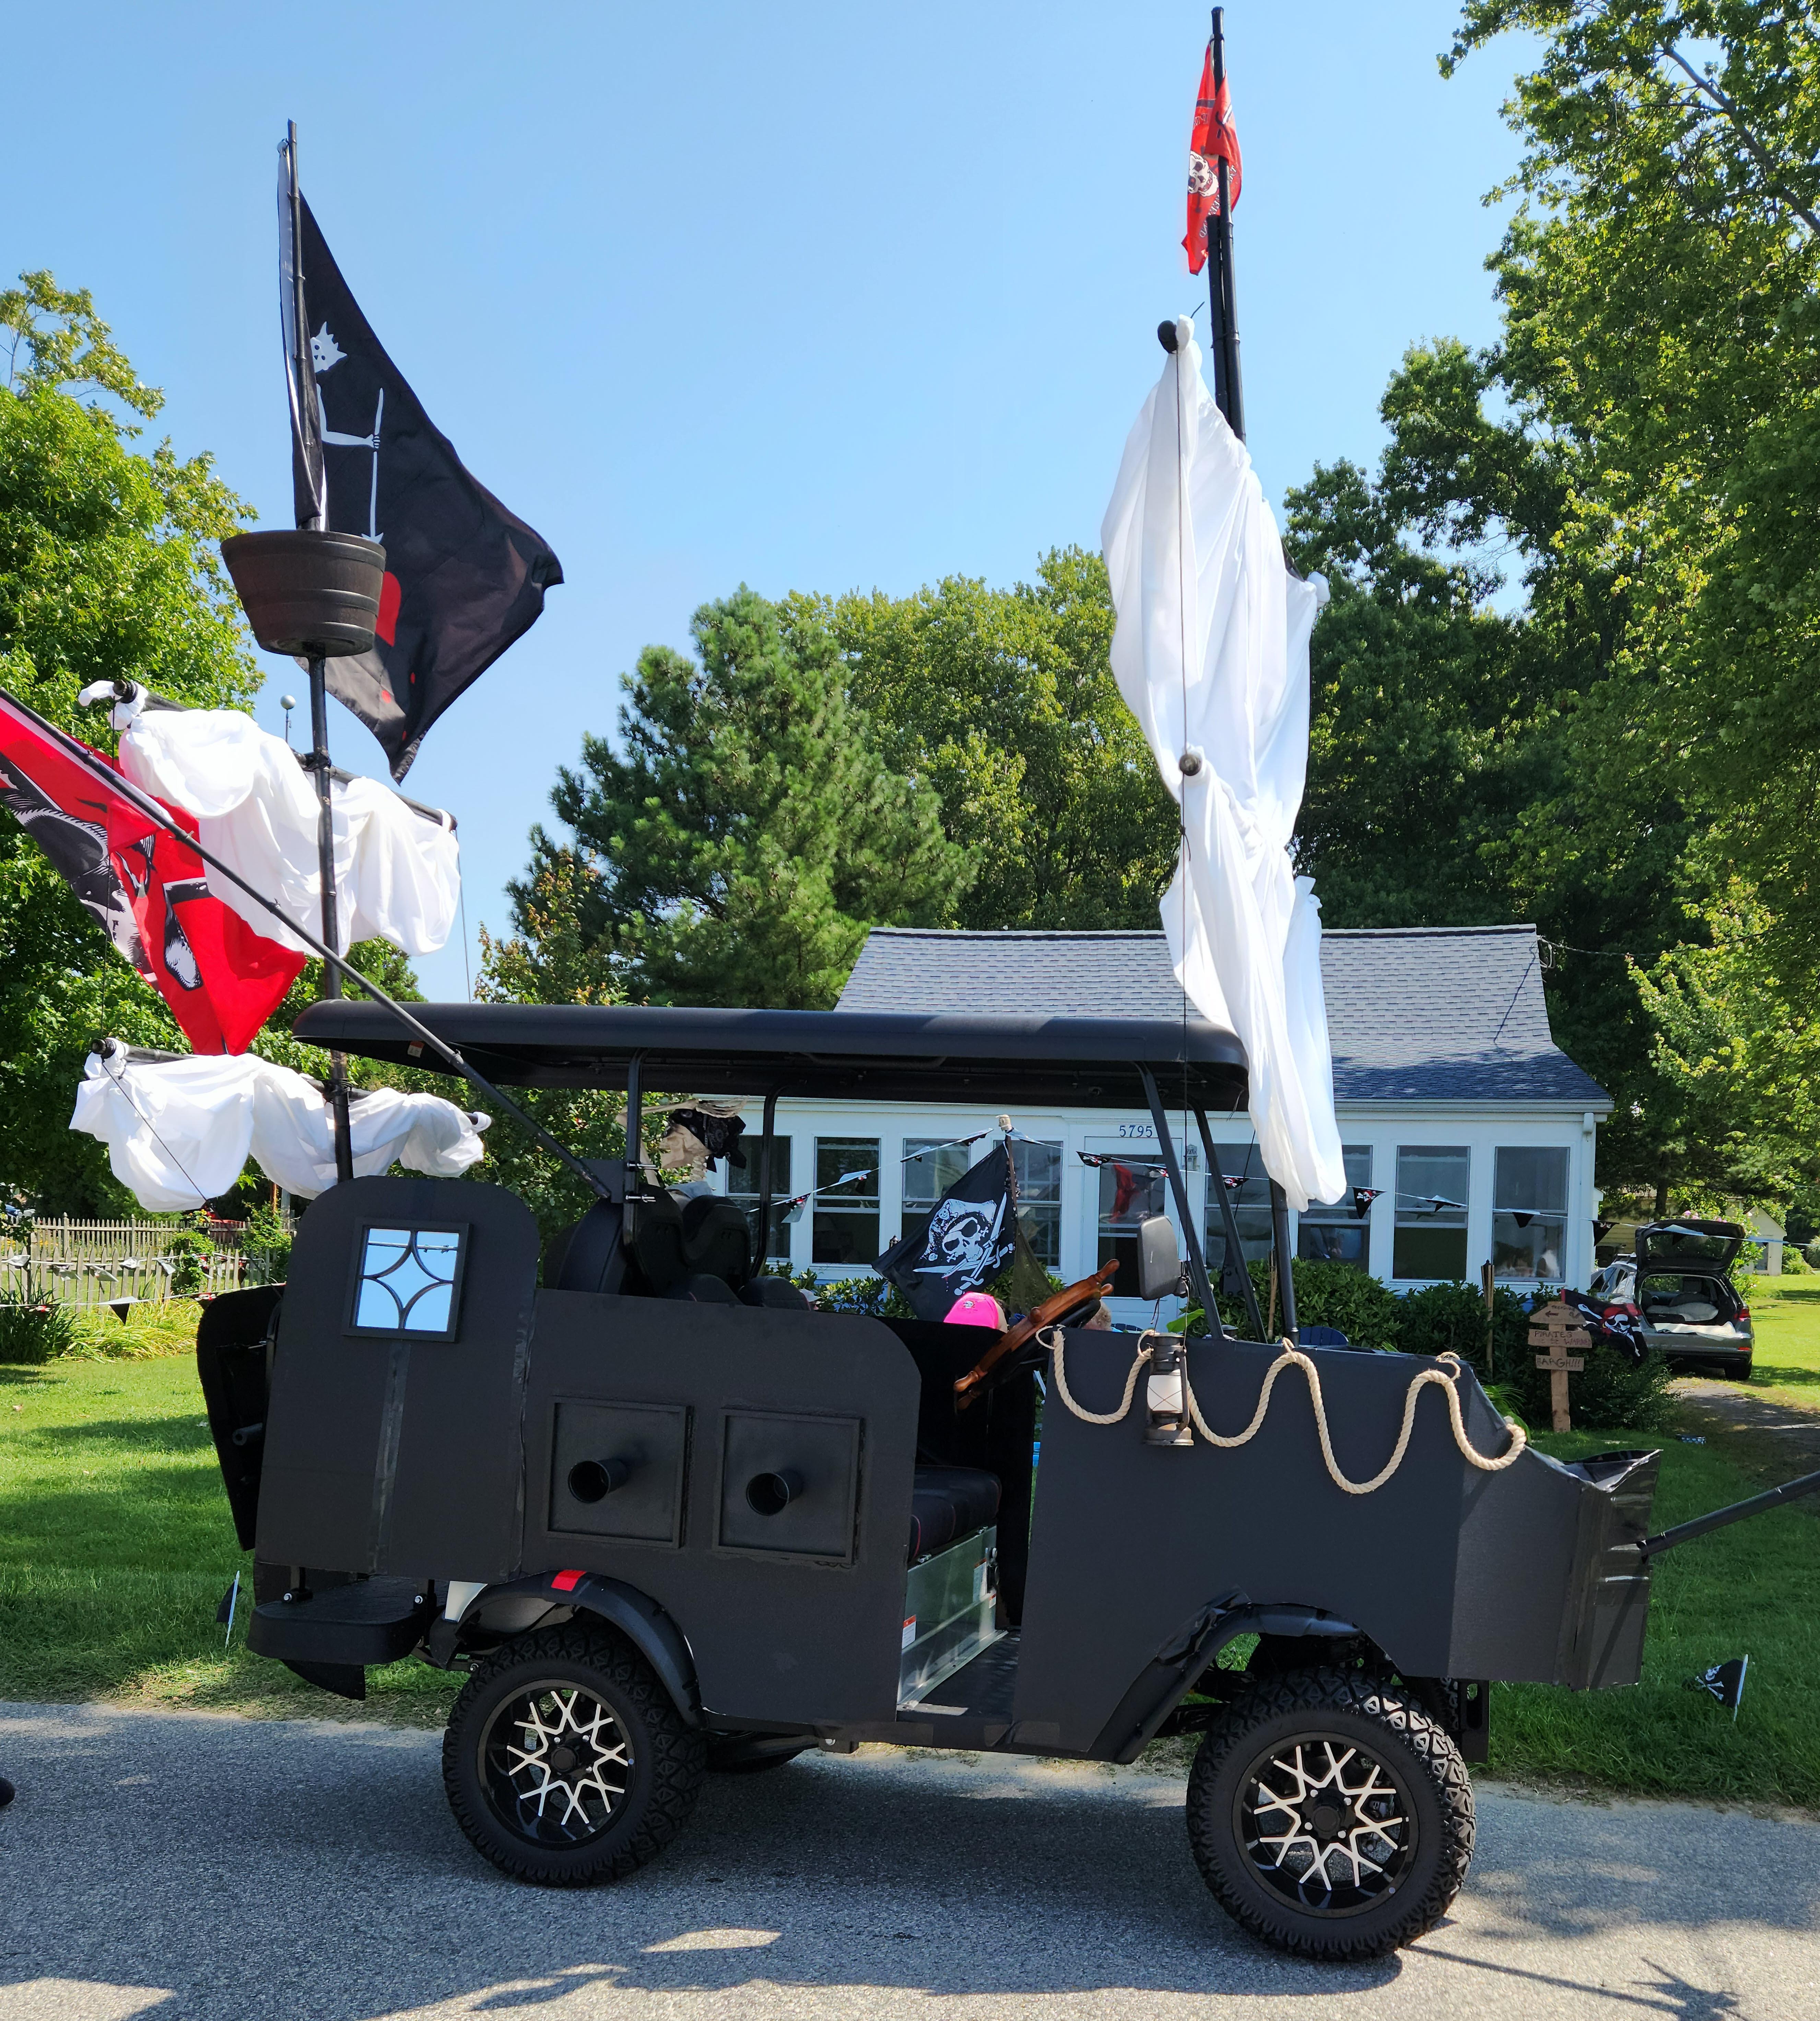 A low-speed pirate vehicle for Pirates and Wenches Weekend